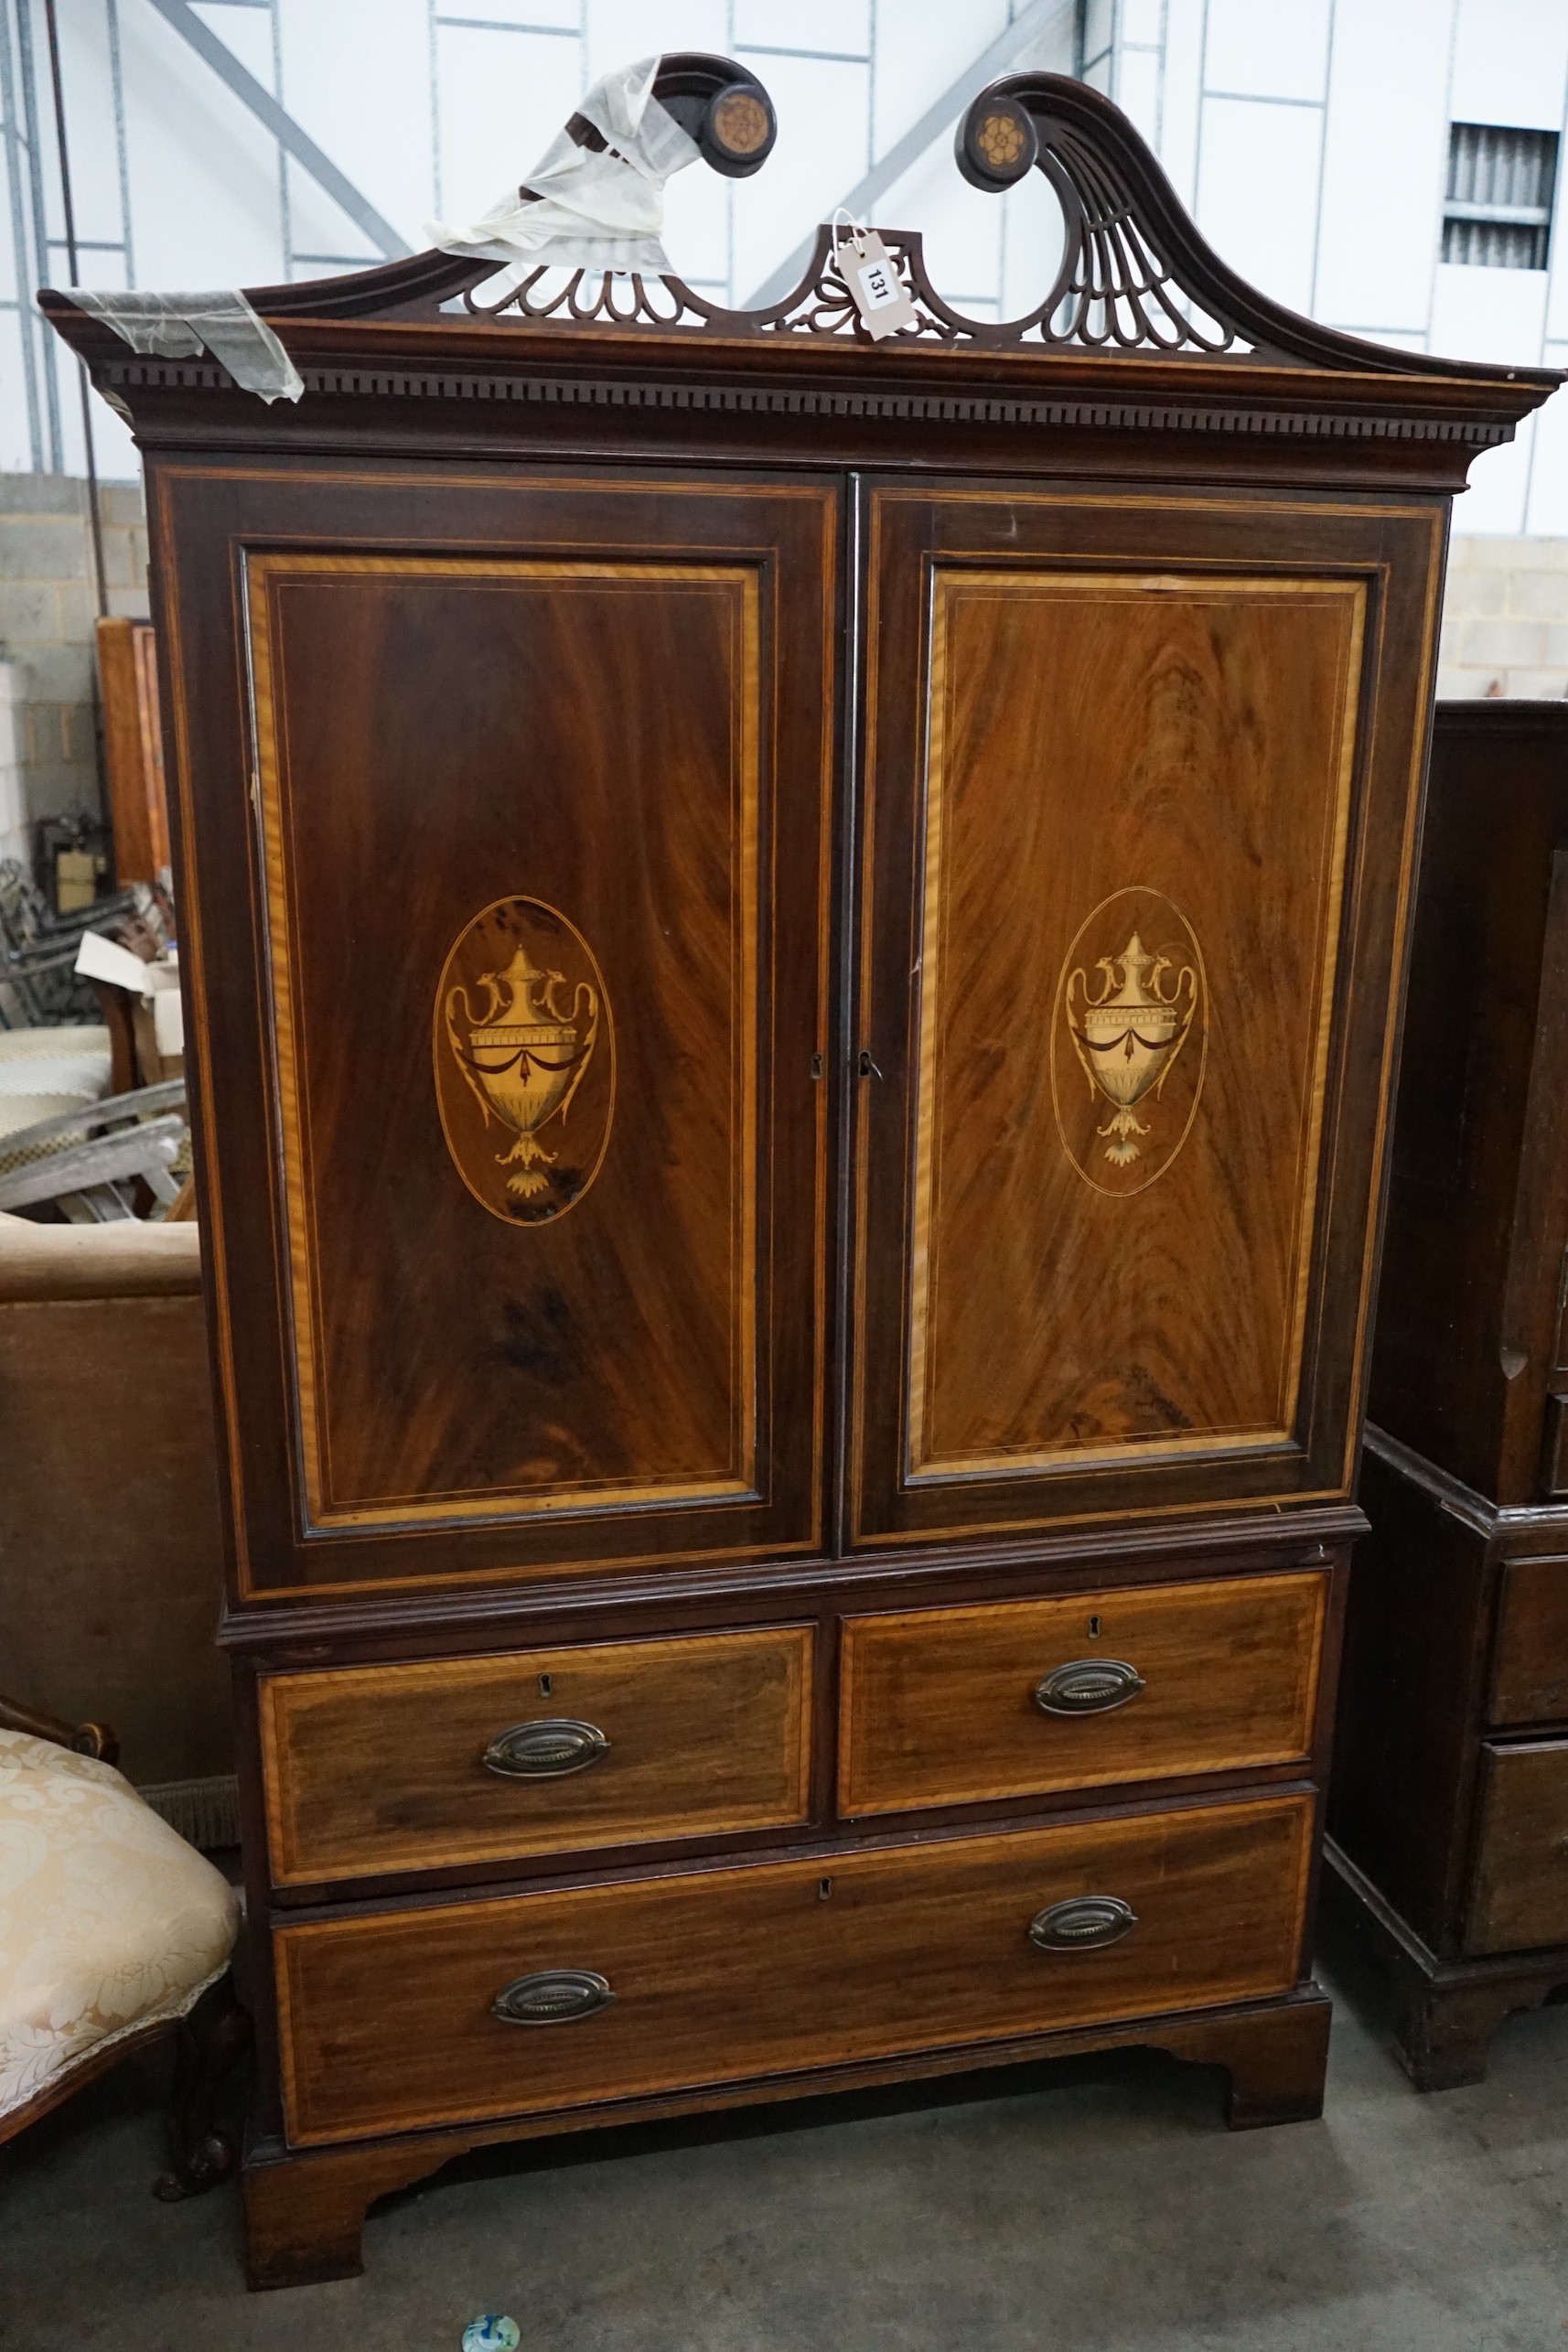 A small George III style inlaid mahogany linen press, width 116cm, depth 59cm, height 186cm